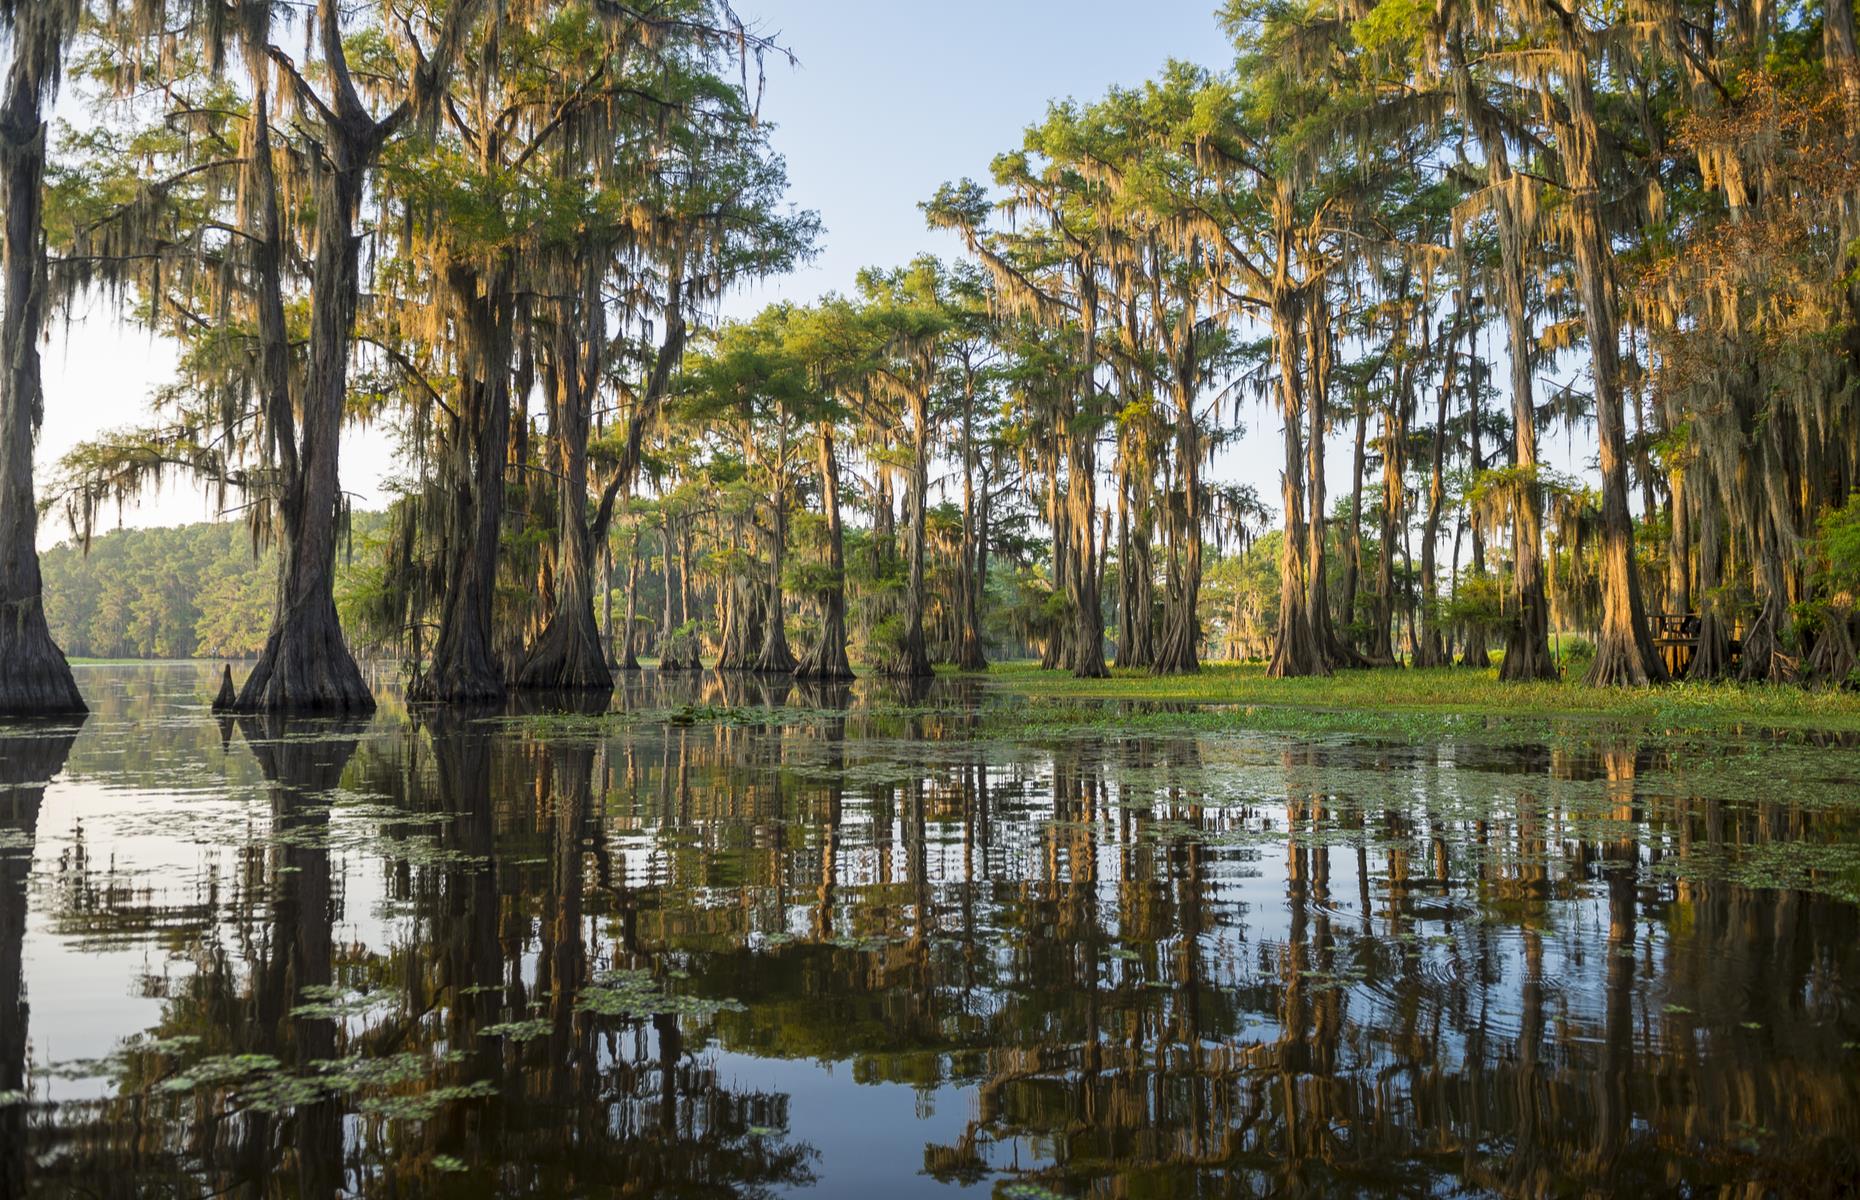 Slide 97 of 100: Caddo Lake unfurls across the Louisiana-Texas border, spreading out for an incredible 25,400 acres. This glorious wetland area is best known for being home to an enormous Spanish moss-drenched cypress forest, tipped as the largest in the world. American alligators lurk beneath the canopy too, usually on the hunt for fish. Discover more of the world's stunning natural wonders here.